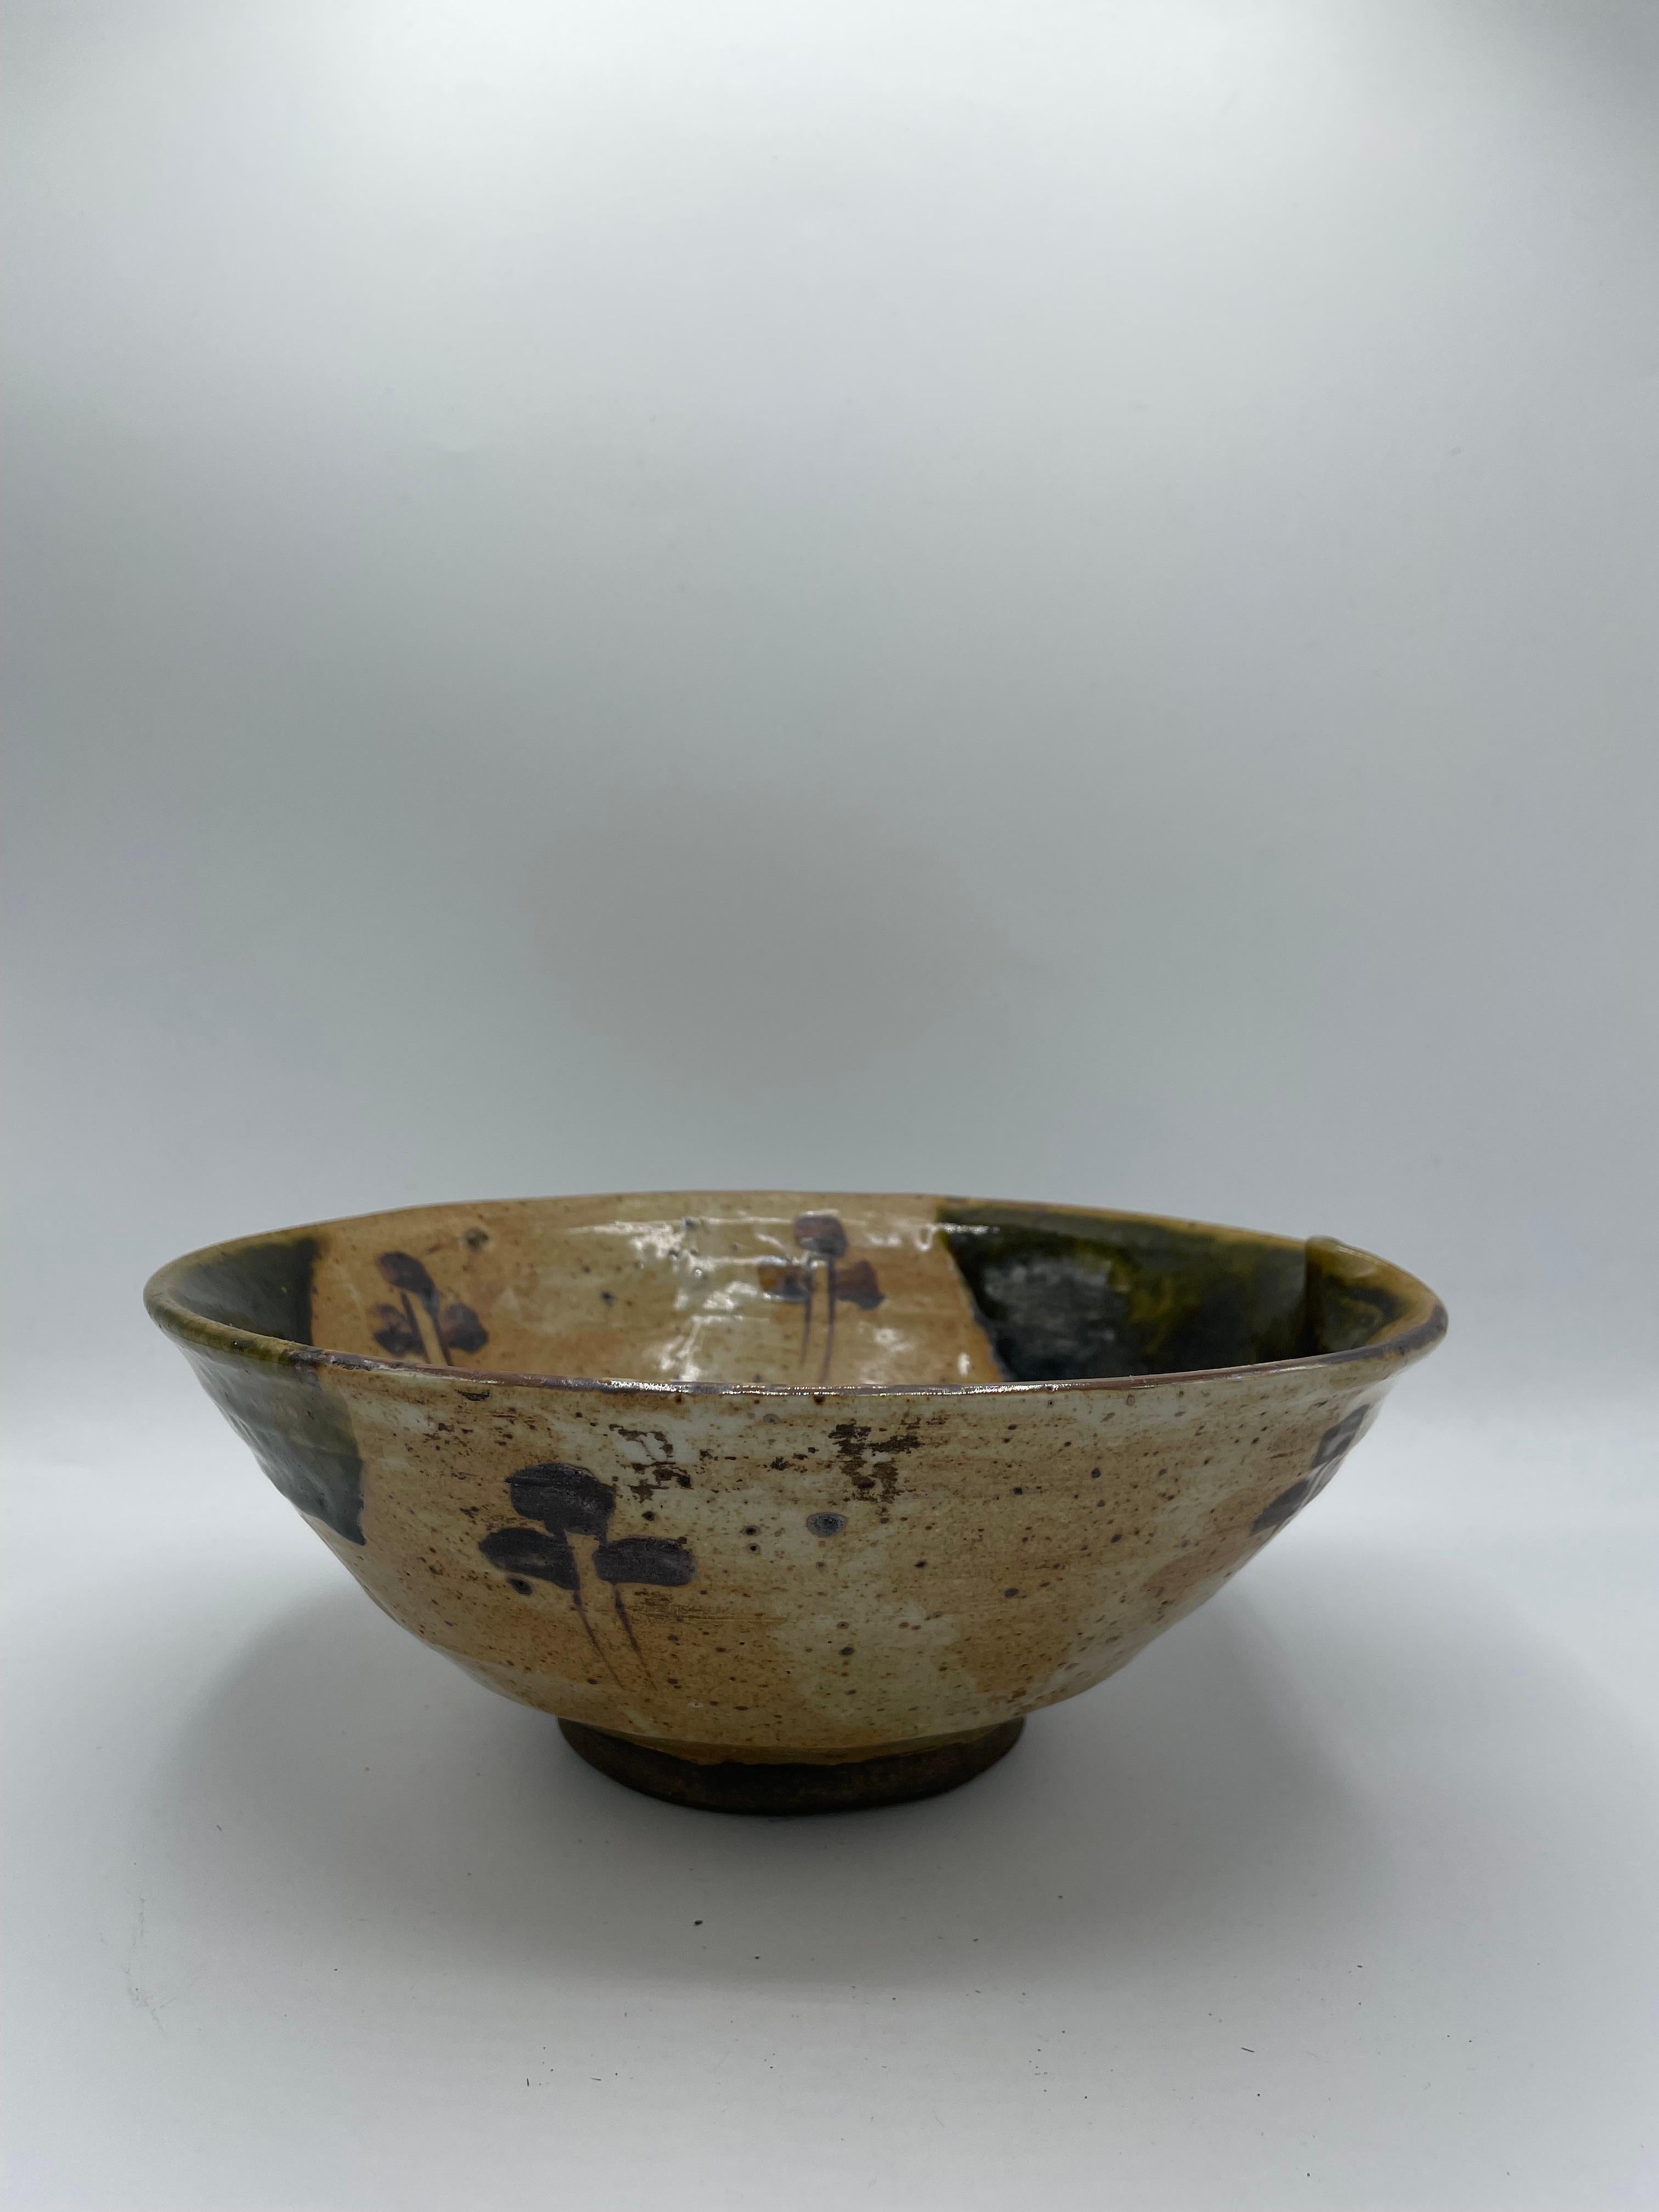 This is an antique porcelain serving bowl.
It is made with Oribe ware technique in Japan. This bowl was made in Edo era around 1850.

Oribe ware (Oribe-yaki) is a style of Japanese pottery that first appeared in the sixteenth century. It is a type